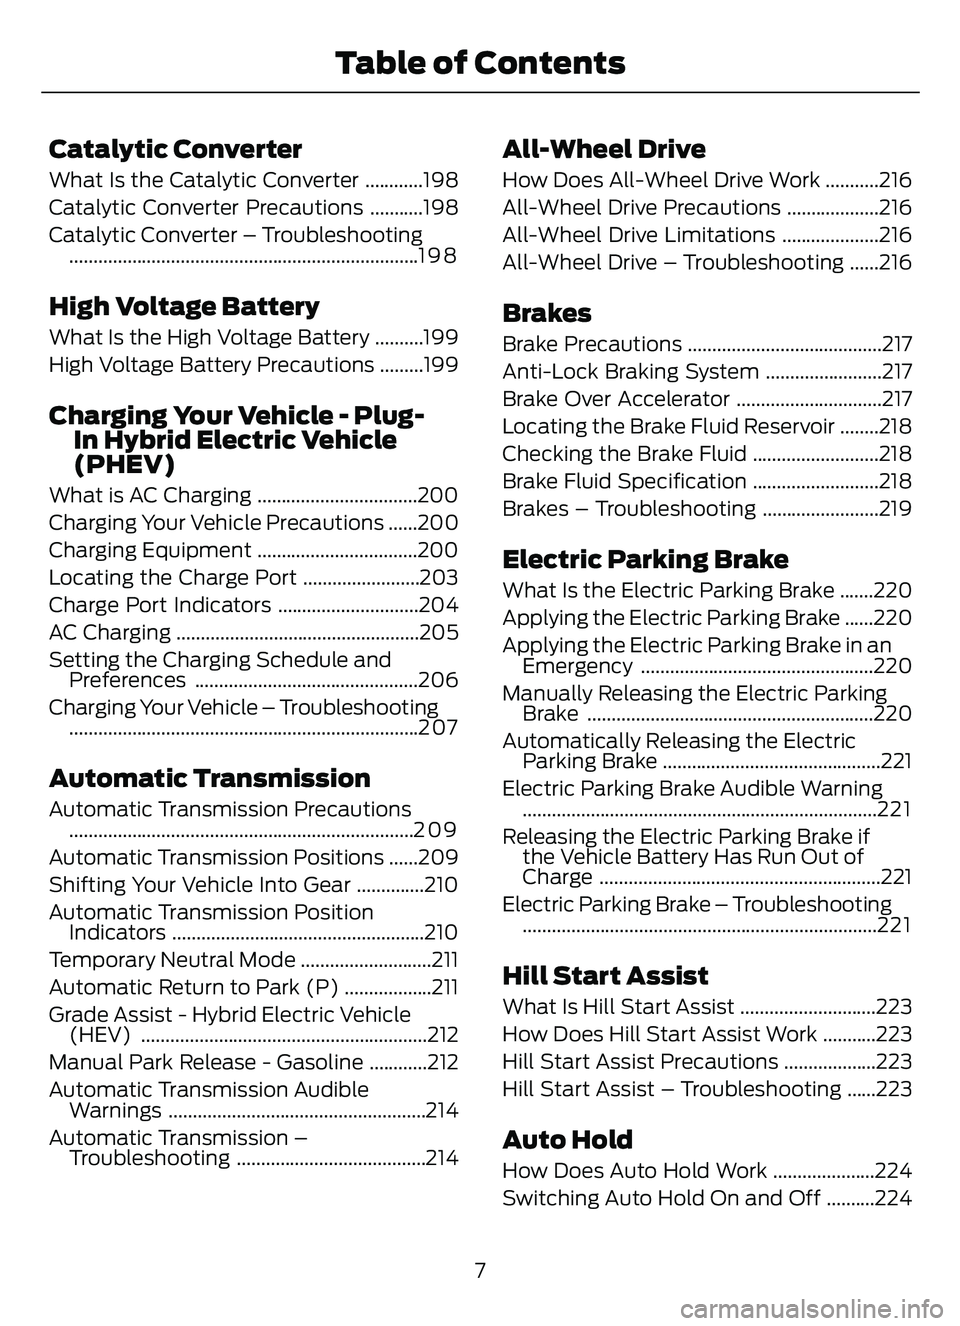 FORD ESCAPE 2022  Owners Manual Catalytic Converter
What Is the Catalytic Converter ............198
Catalytic Converter Precautions ...........198
Catalytic Converter – Troubleshooting..............................................